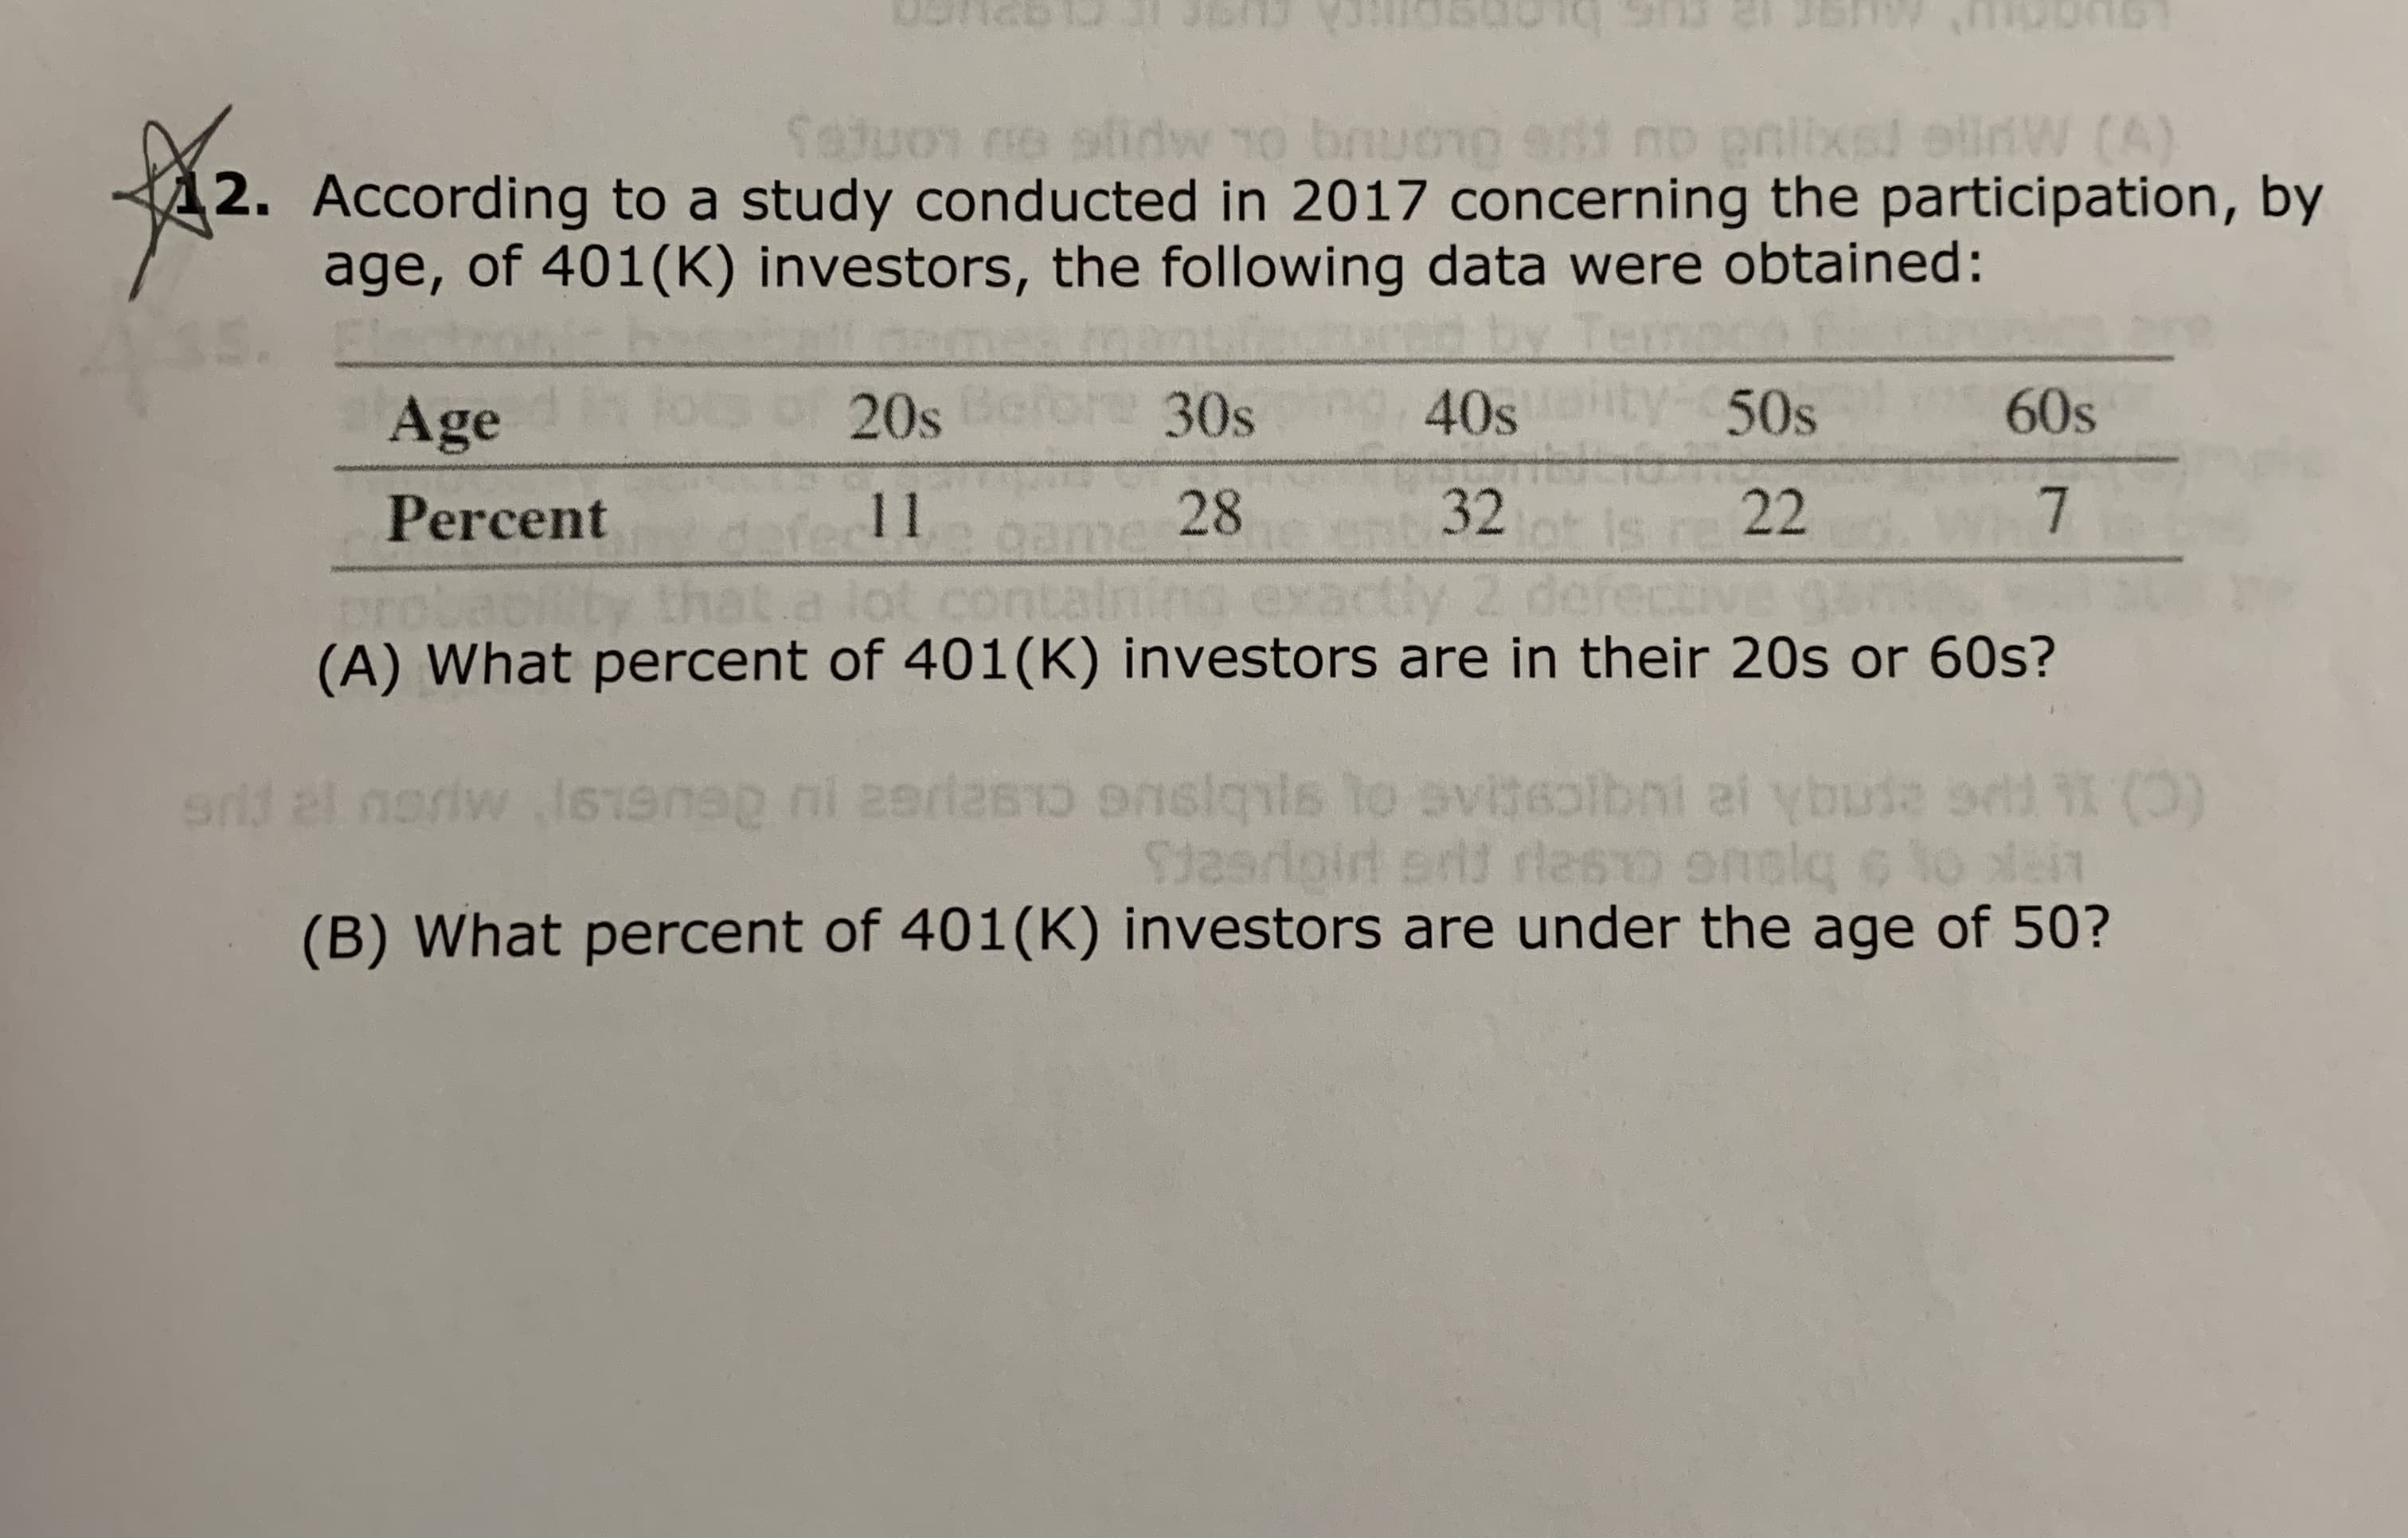 t:13
Shy
bruonp
LOncey
C
W (A)
Sai
ni no
2. According to a study conducted in 2017 concerning the participation, by
age, of 401(K) investors, the following data were obtained:
5.
40sty 50s
60s
20s Be
30s
Age
7
28
32
22
11
Percent
ly
ot con
(A) What percent of 401(K) investors are in their 20s or 60s?
r al noriw ls1en i erte10 lsto svitsolbni al Ybuie d(
Stasridiold ertd desto on lq to cten
(B) What percent of 401(K) investors are under the age of 50?
ni ai ybute sdt(
siqis lo
6
STO
